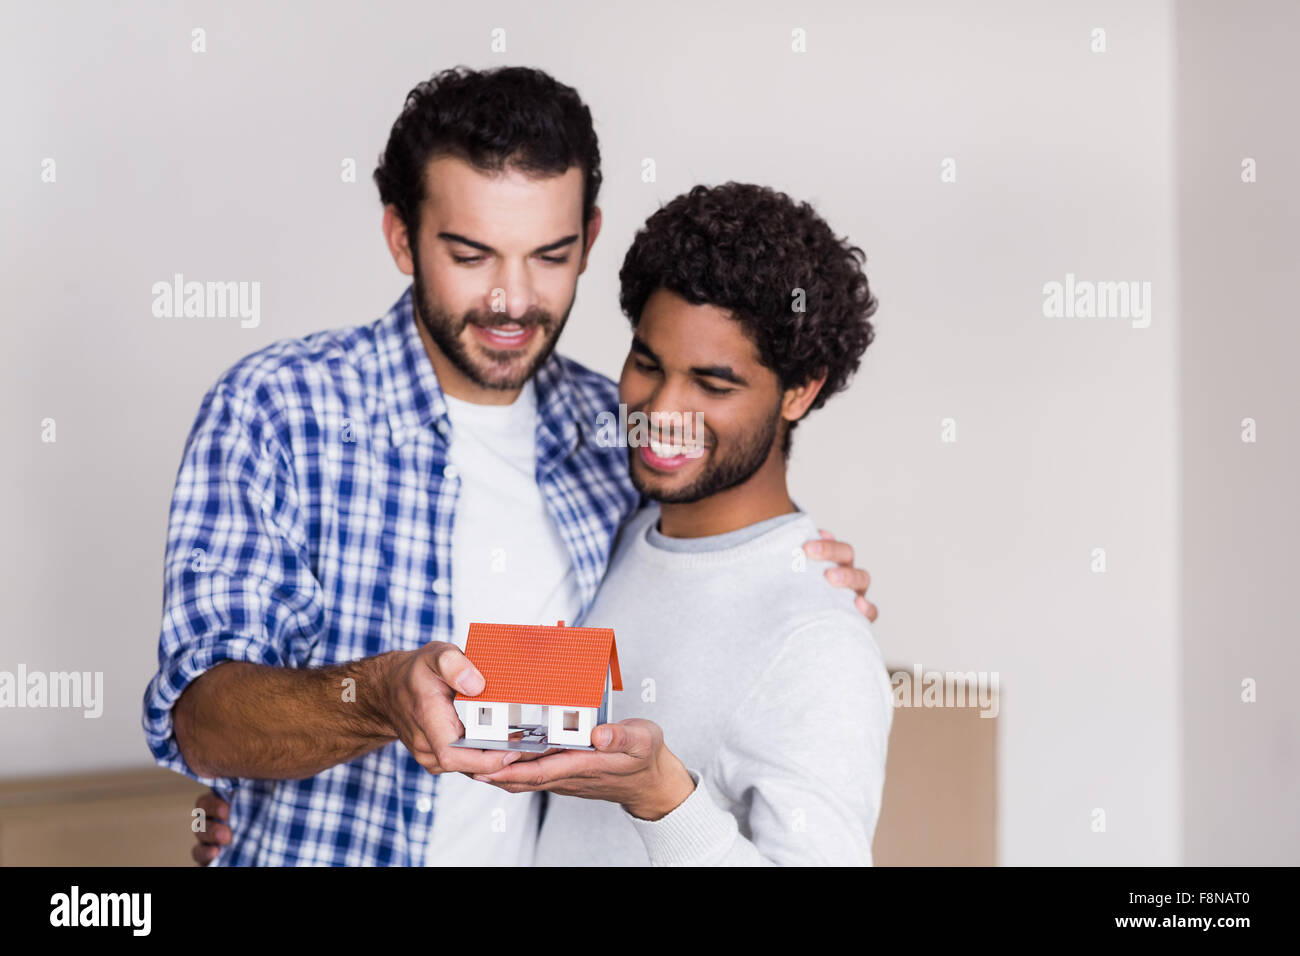 Happy gay couple holding miniature house model Banque D'Images